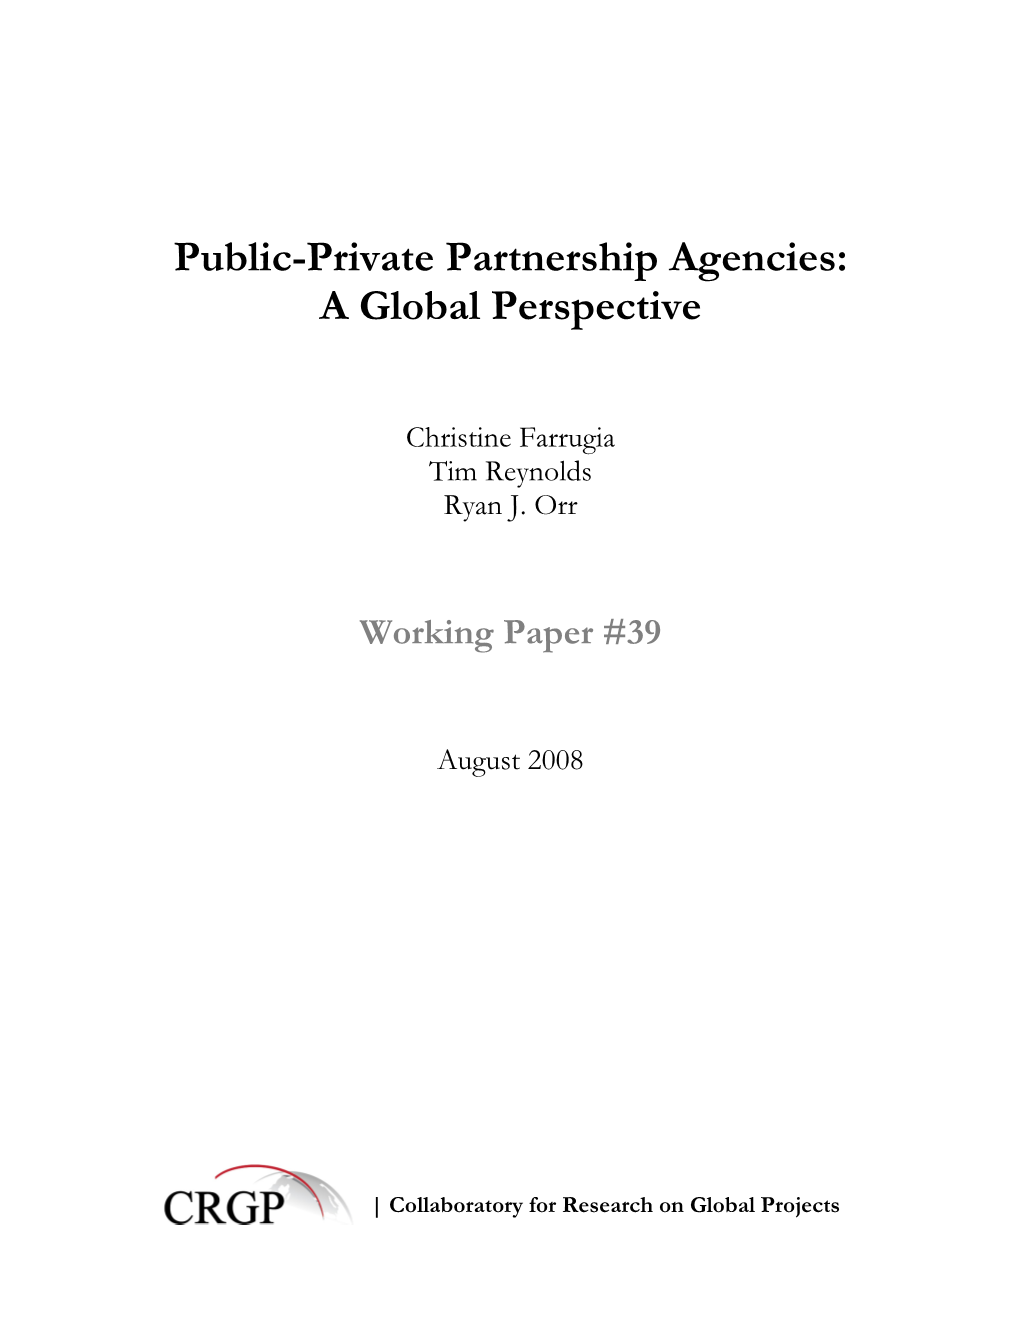 Public-Private Partnership Agencies: a Global Perspective